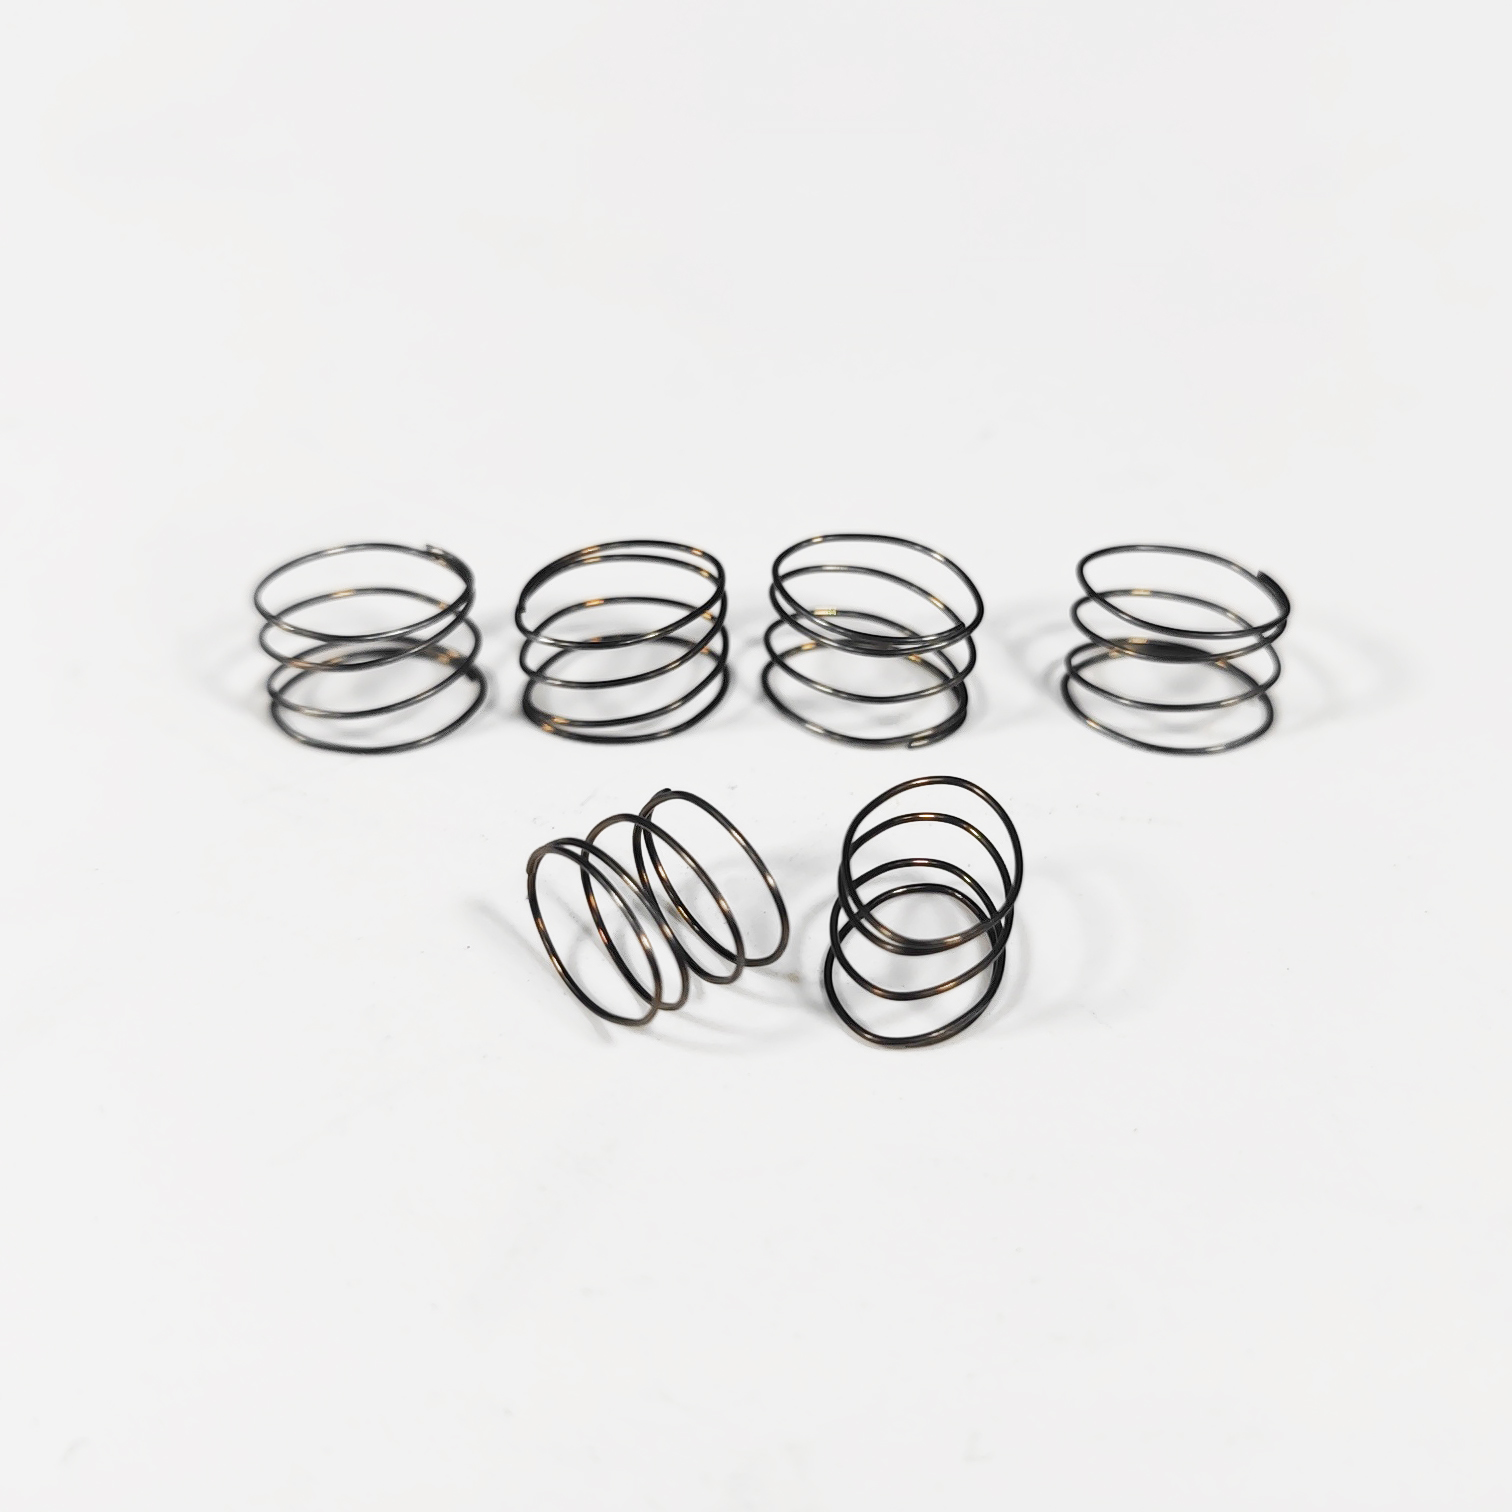 Oval Compression Springs for Precision Instruments